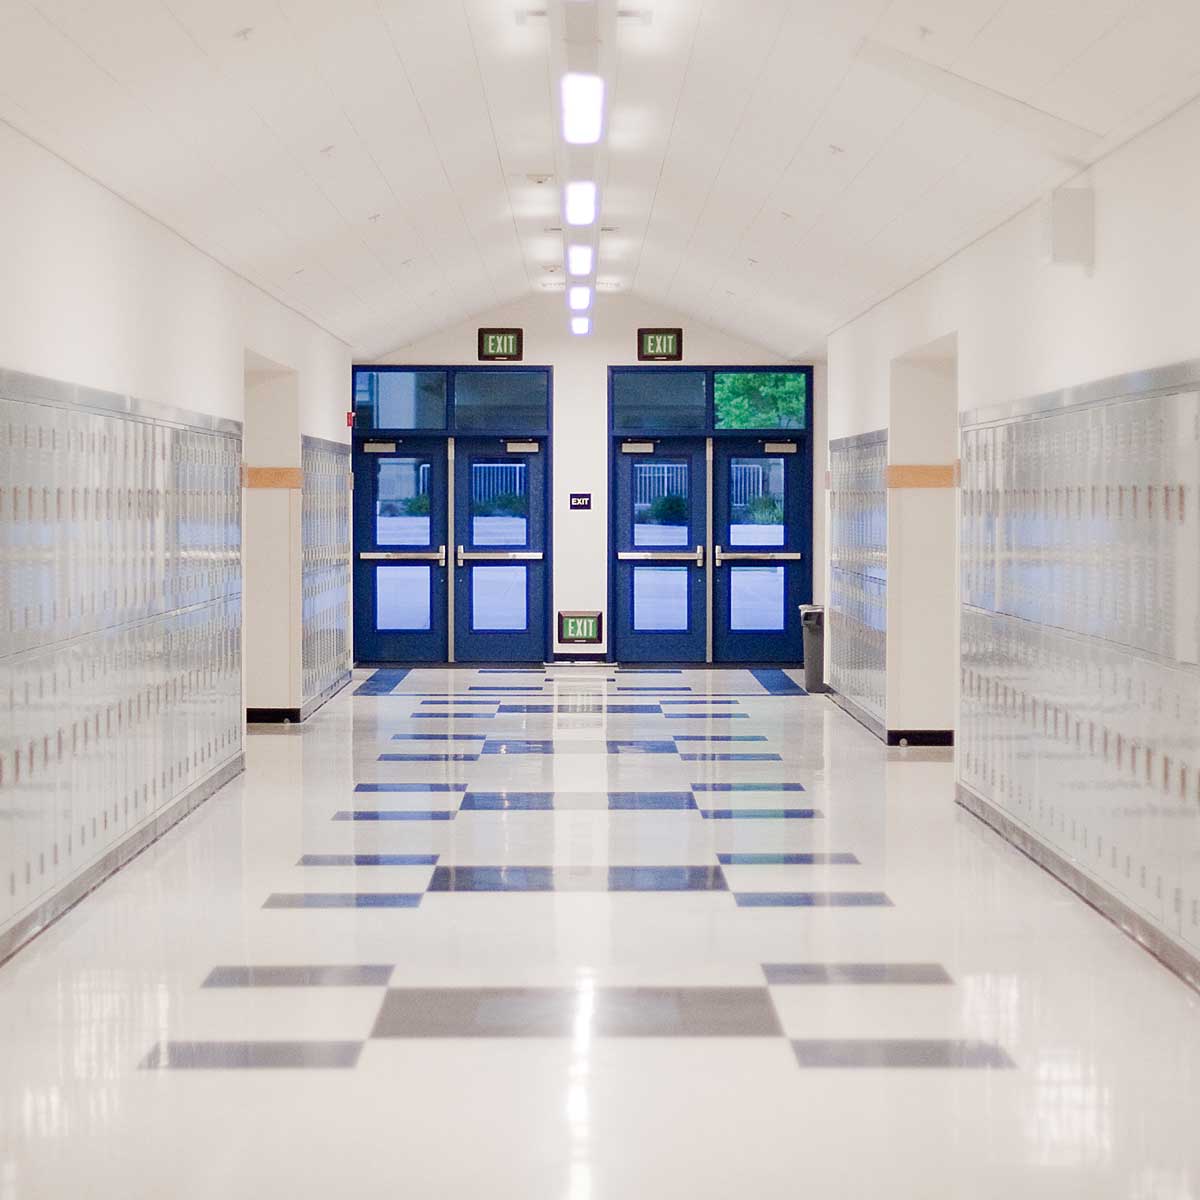 School Hallway with lockers on walls and blue doors to outside